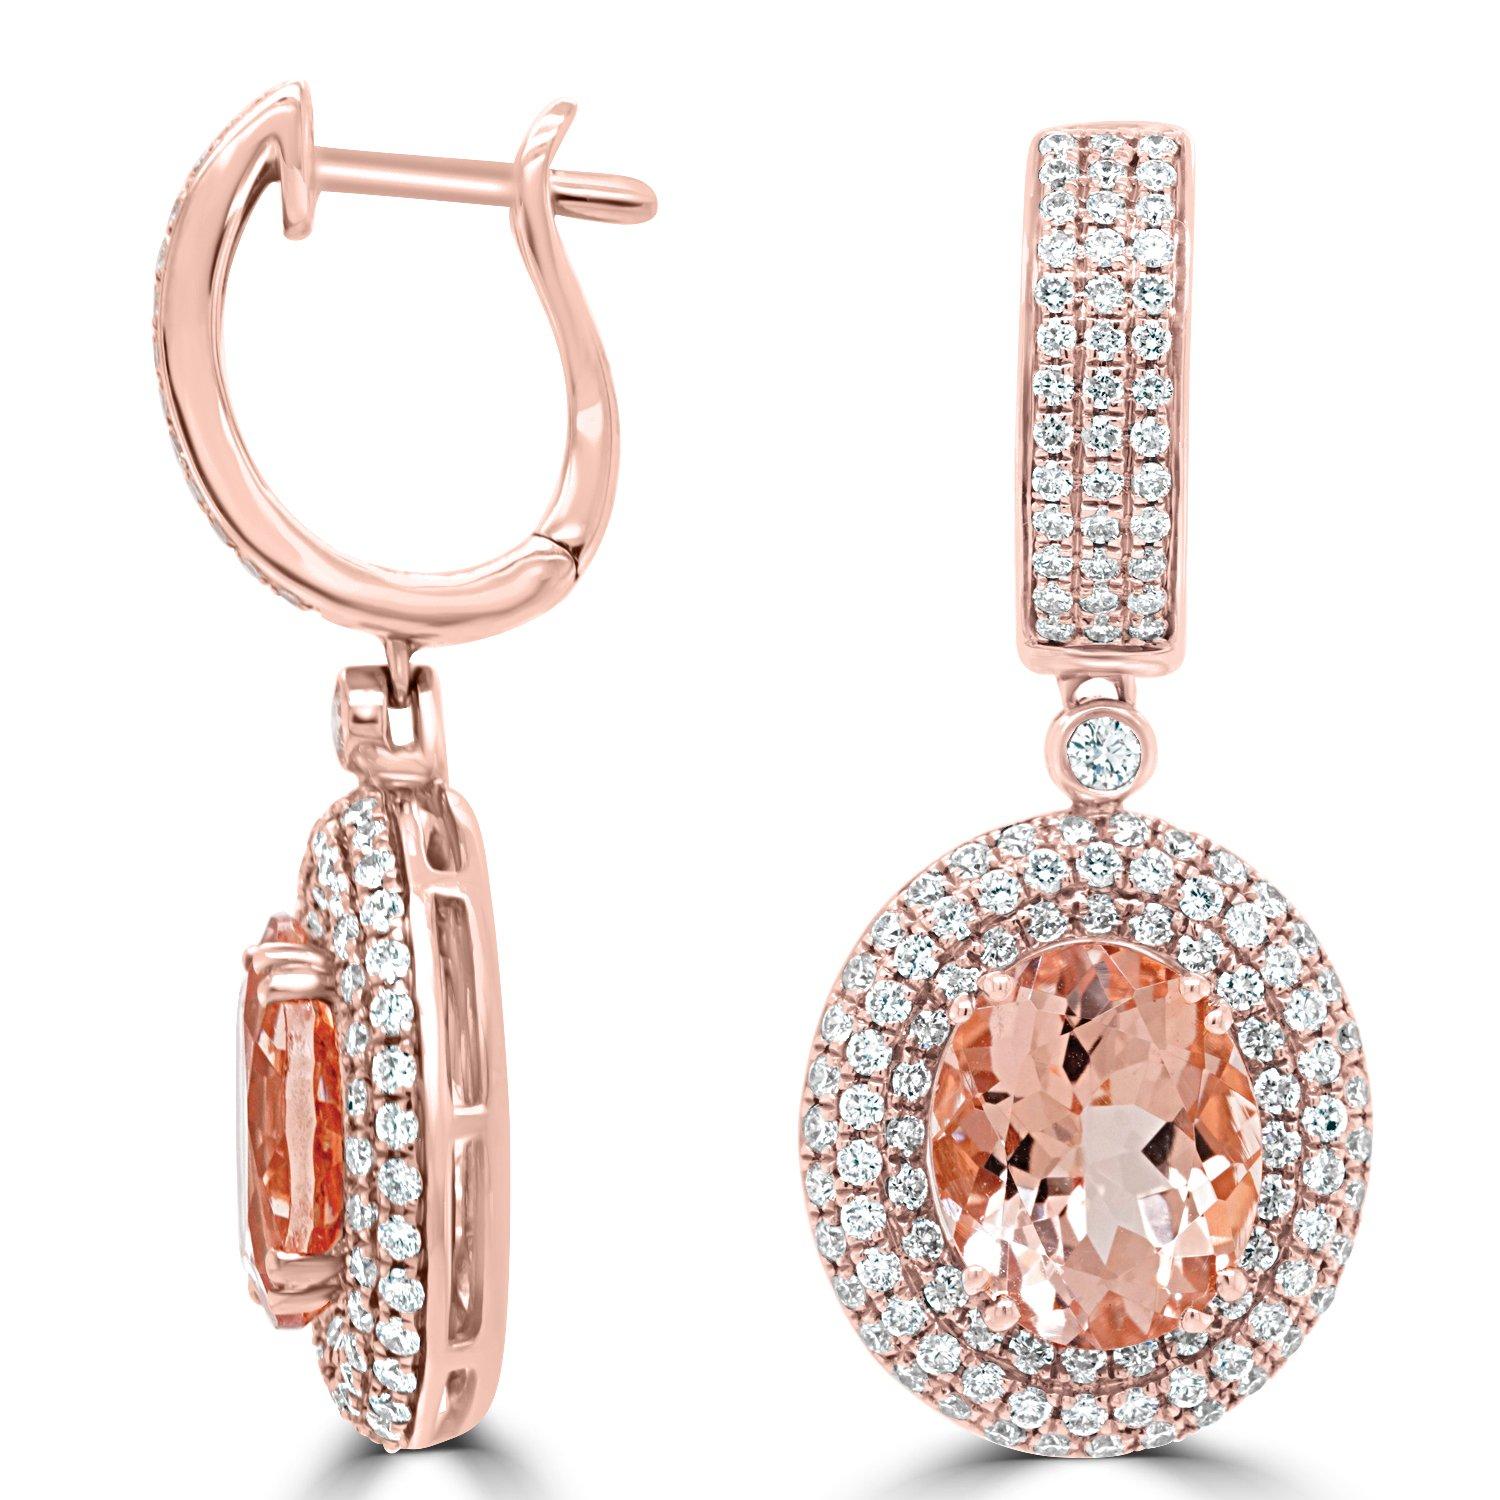 Women's 7.02ct Morganite Earring with 1.97ct Diamonds Set in 14K Rose Gold For Sale